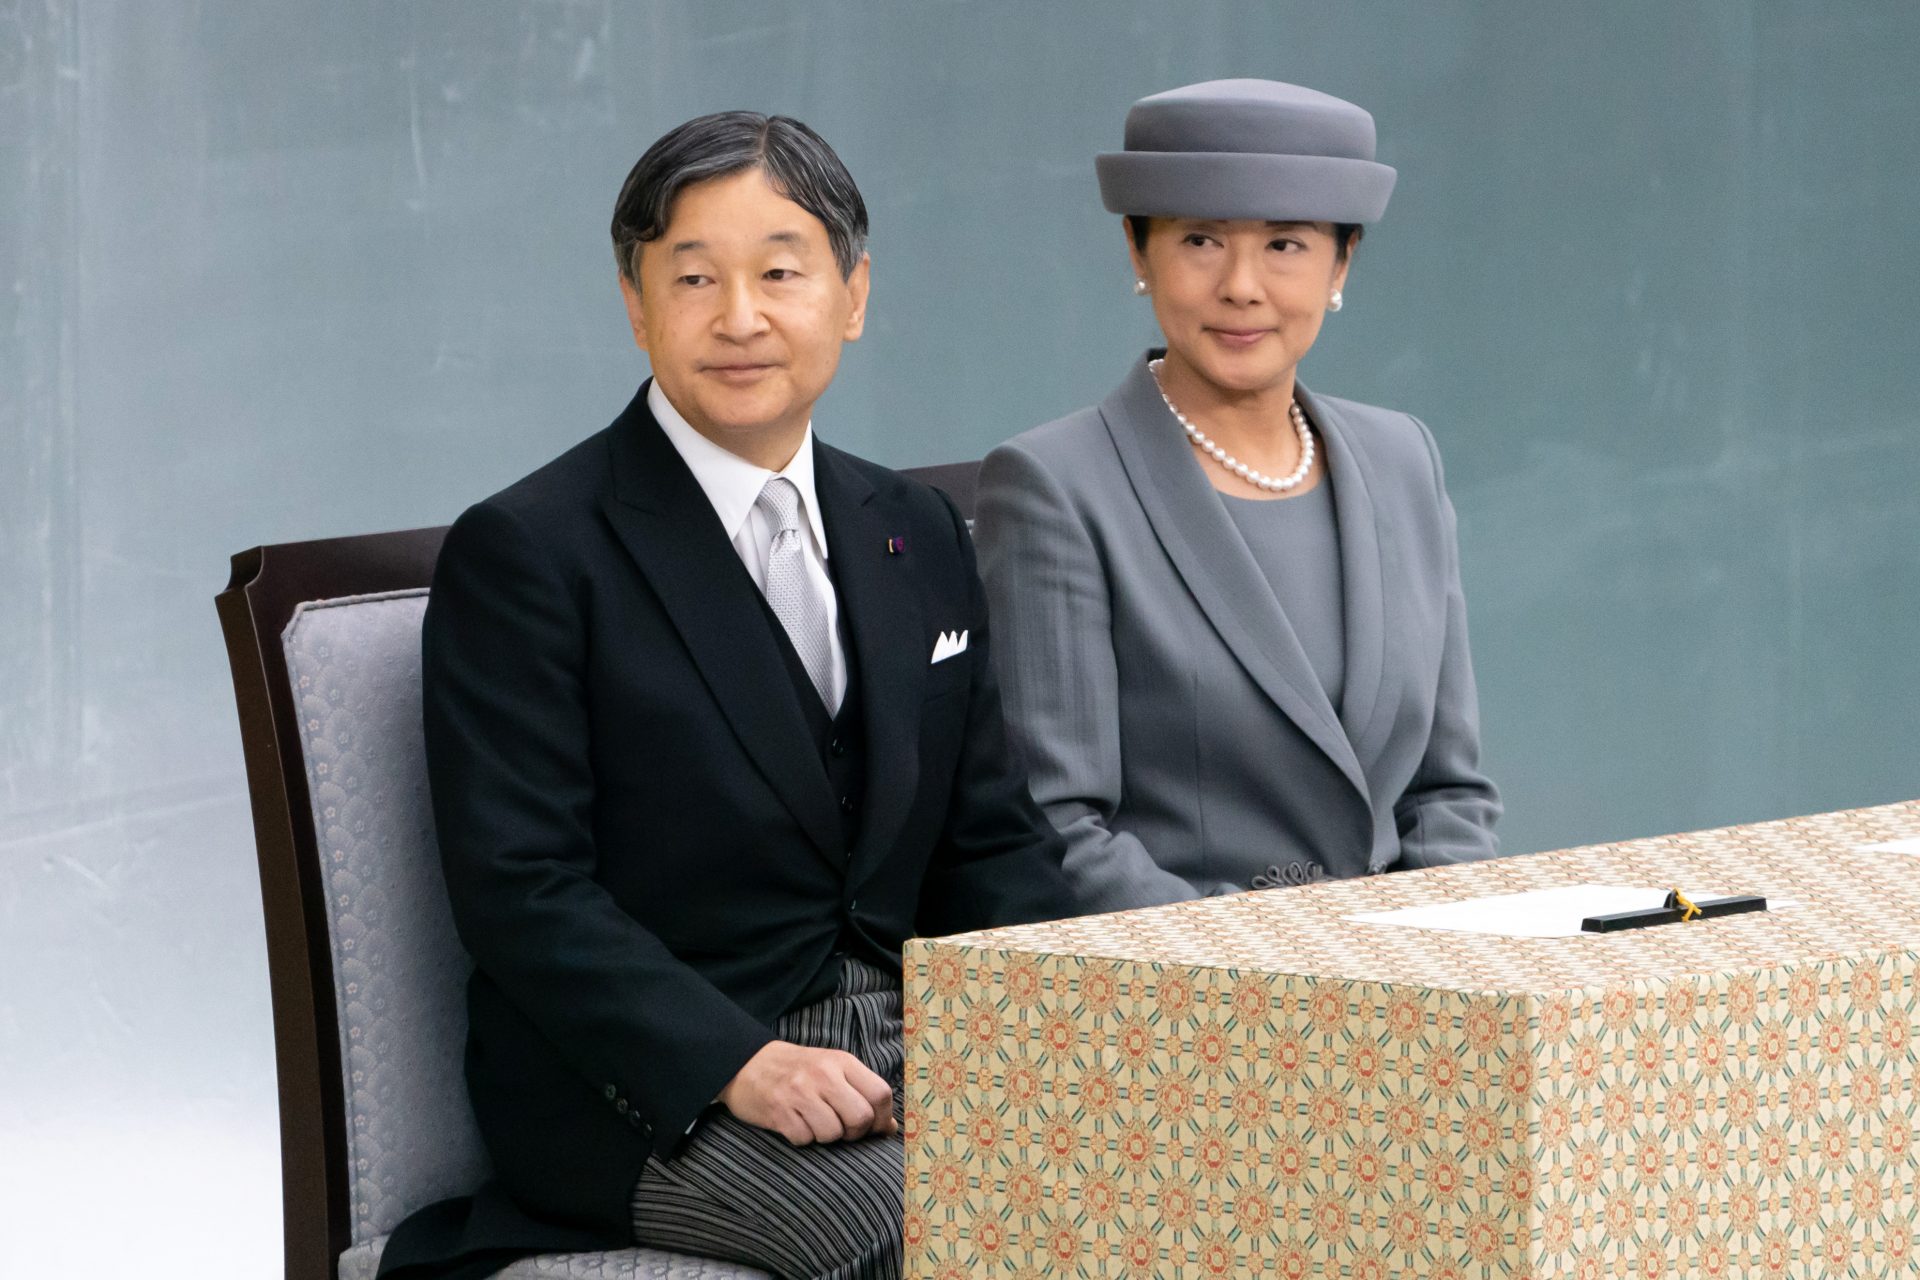 Who's who in the Japanese imperial family?